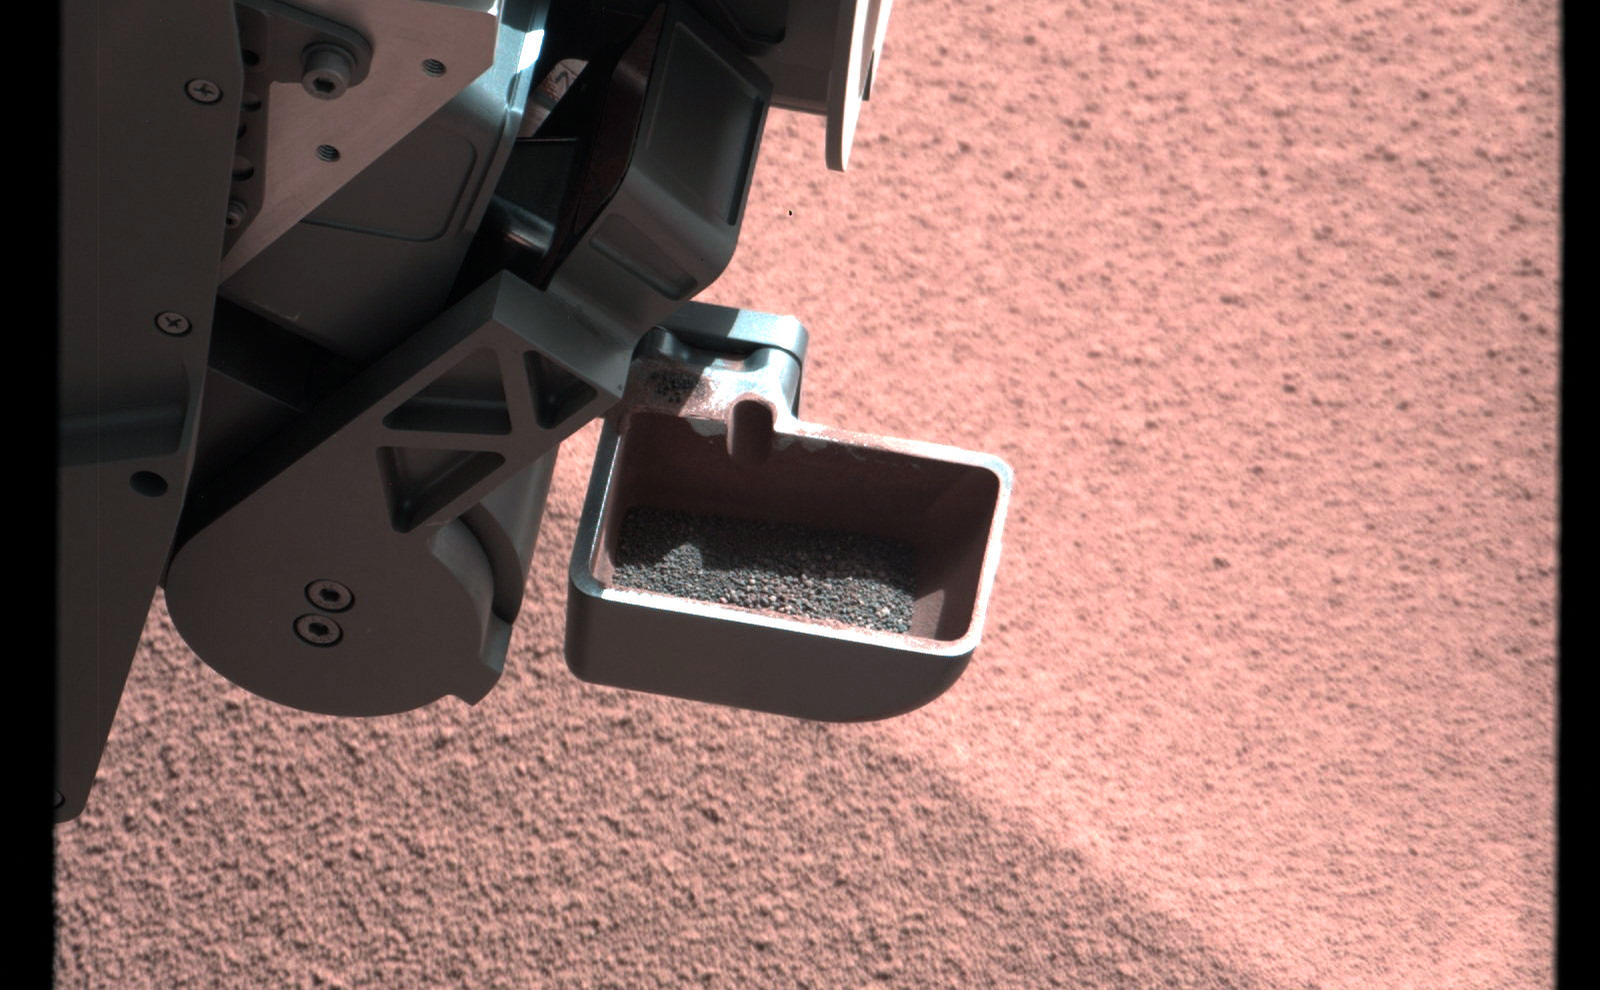 In this image, the scoop on NASA's Curiosity rover shows the larger soil particles that were too big to filter through a sample-processing sieve that is porous only to particles less than 0.006 inches (150 microns) across.